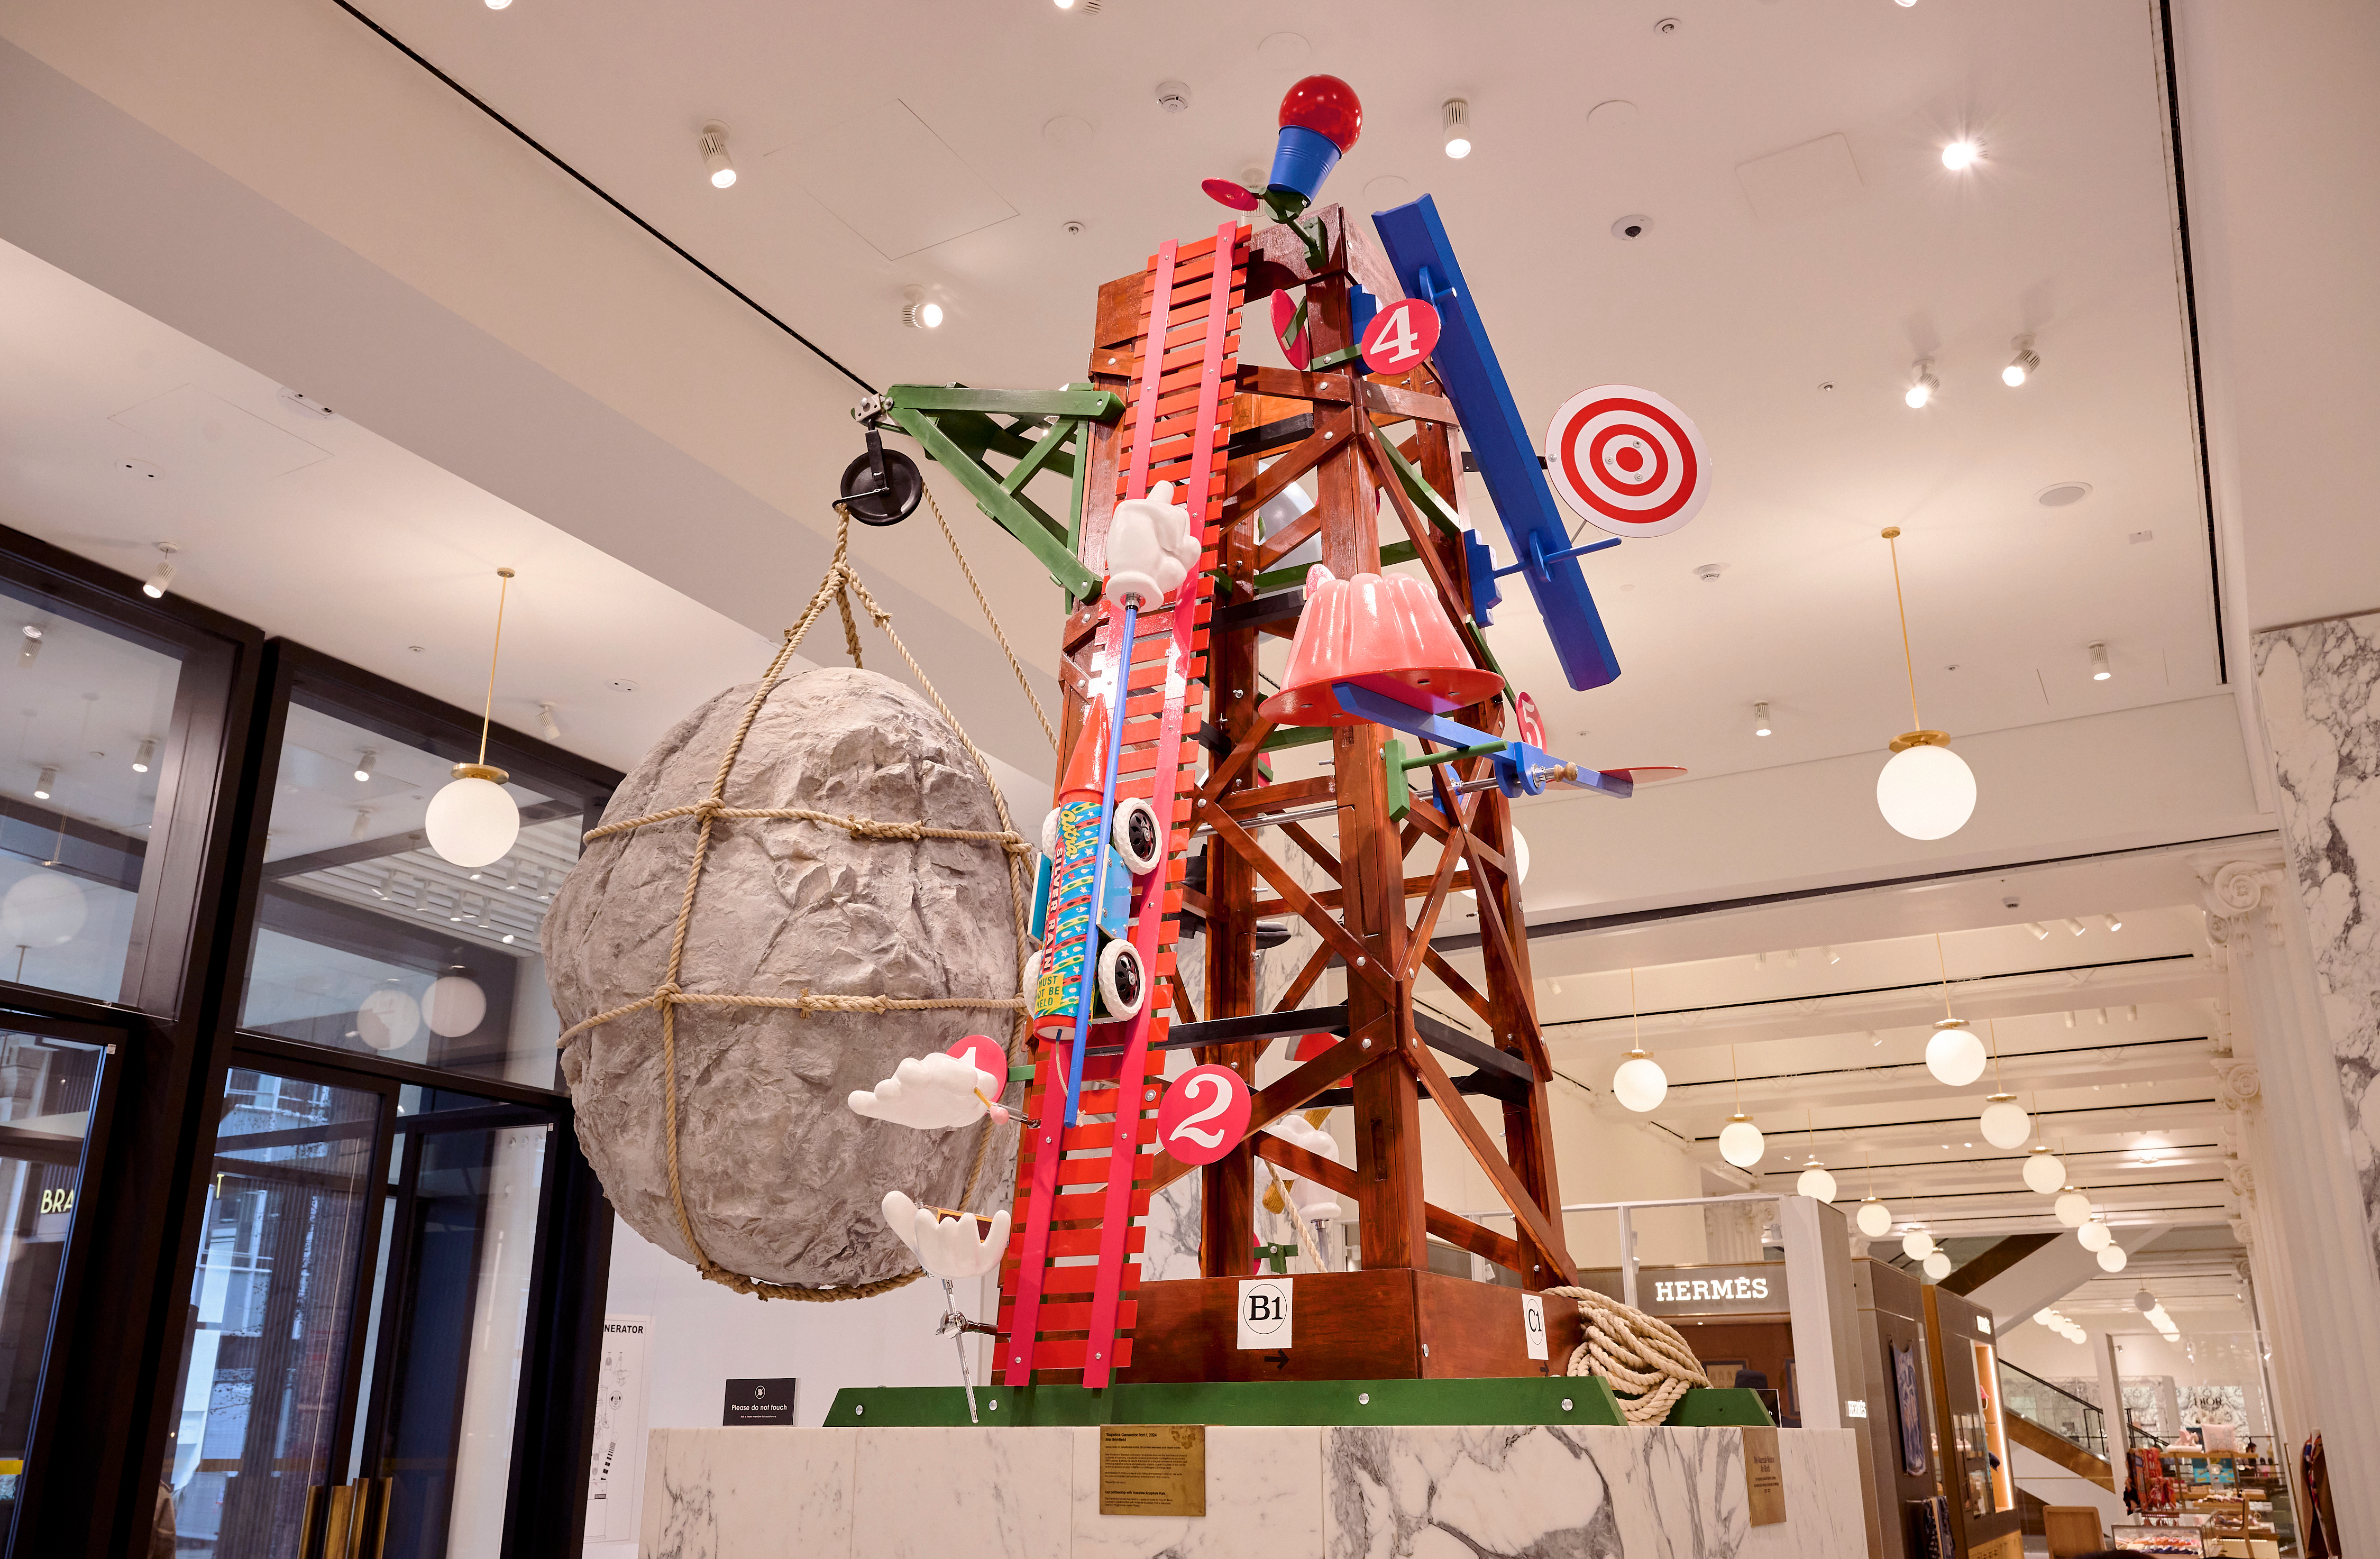 A colourful scaffolding structure with giant targets, models of cars, targets and giant rocks.